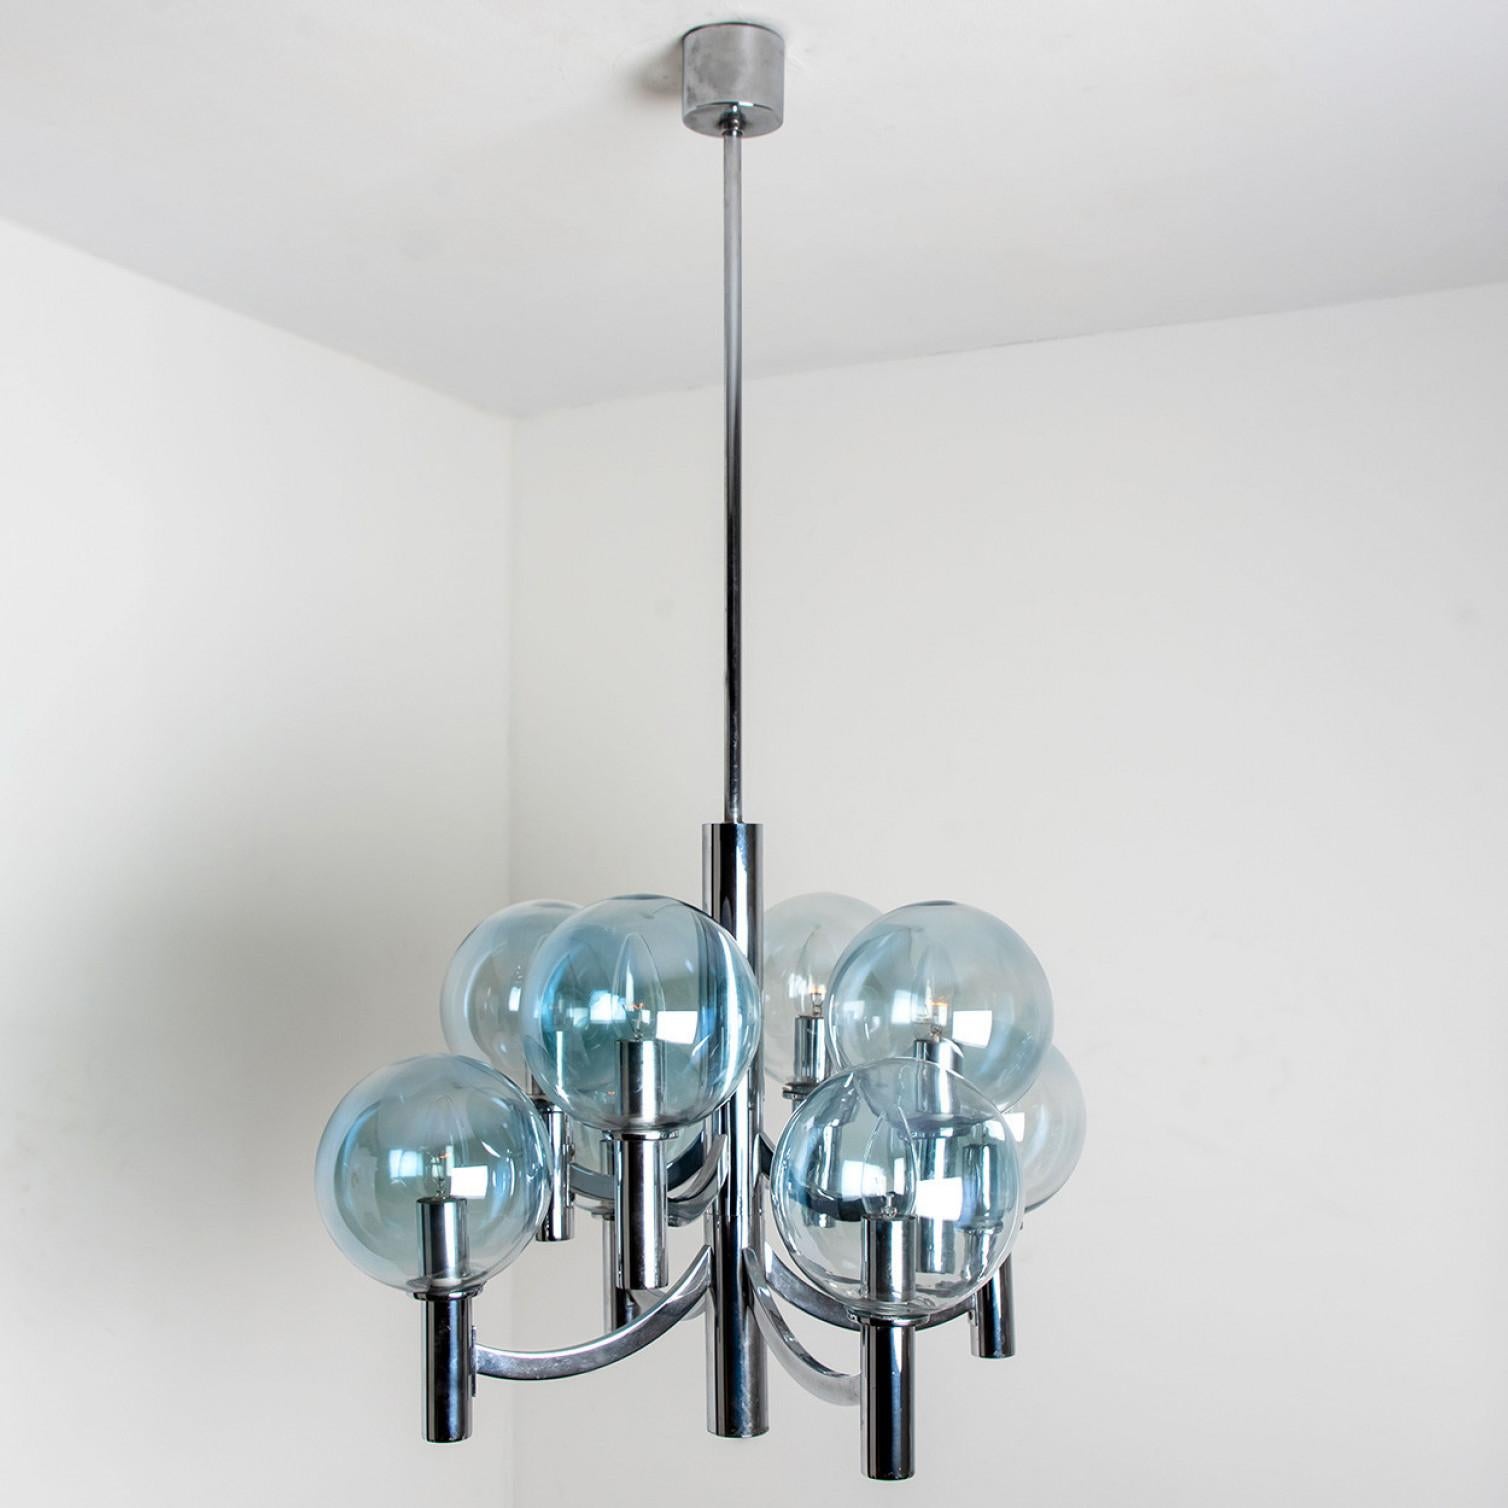 Wonderful chandelier with light blue glass bowls and a chrome base and fittings. Produced in the 1970s in the style Hans-Agne Jakobsson. Illuminates beautifully.
The chandelier has 8 blue toned glass bulbs fixed on a chrome frame.

Size of the